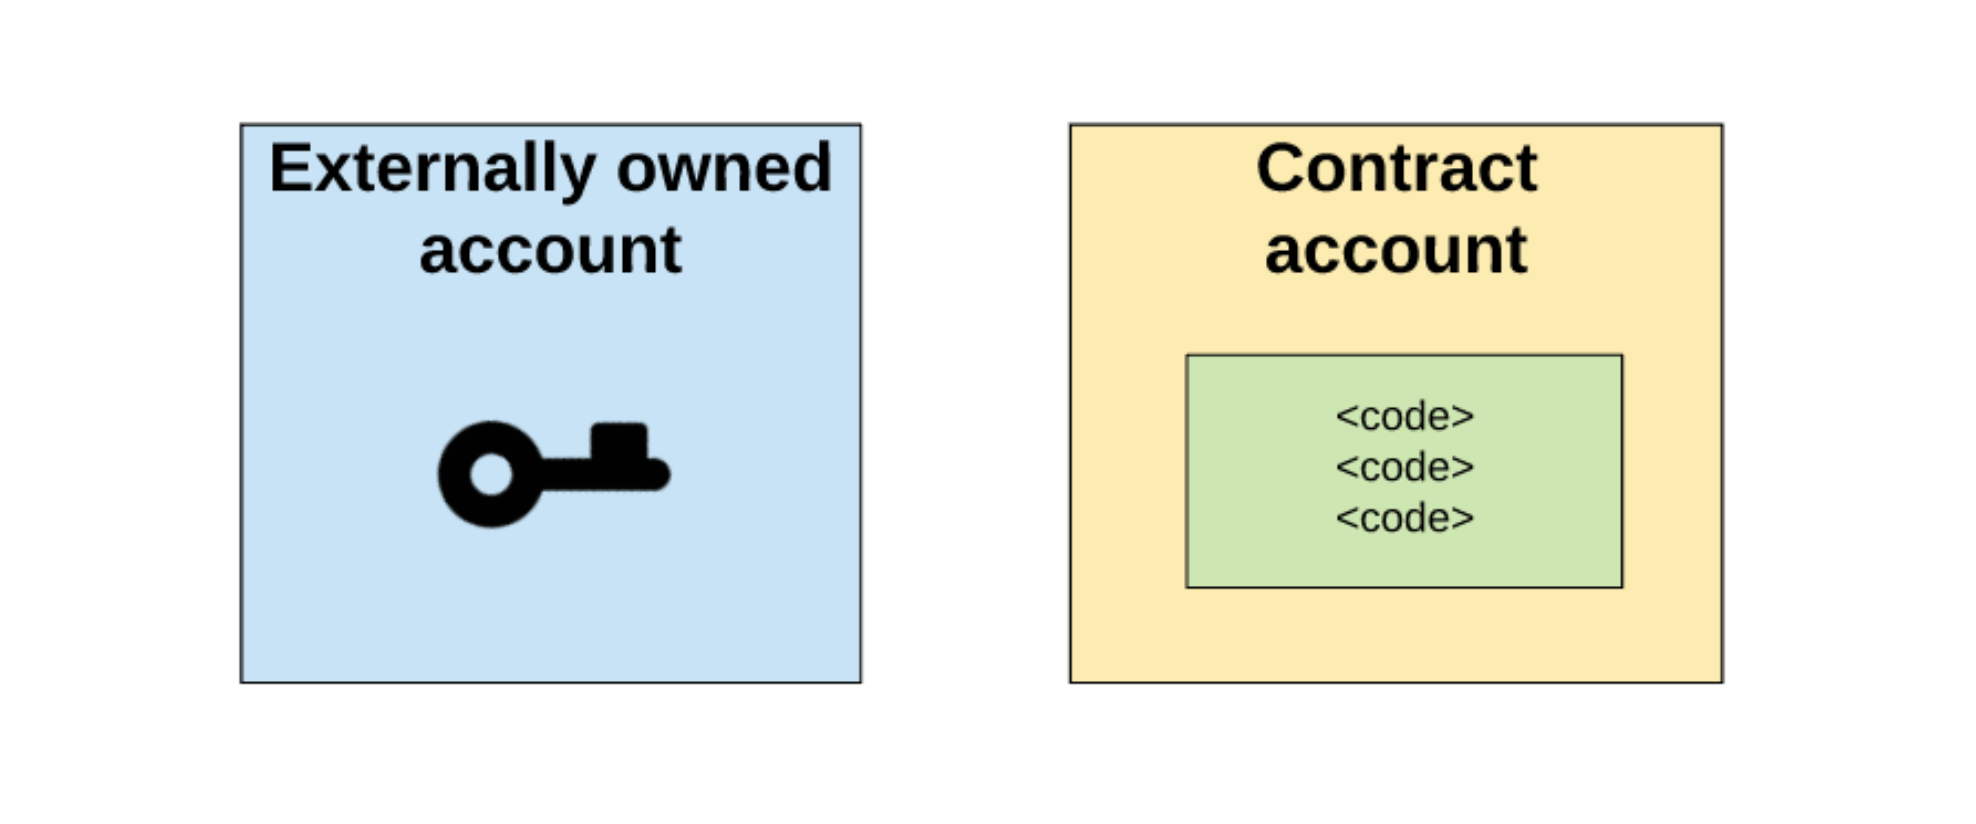 Externally owned account and contract account